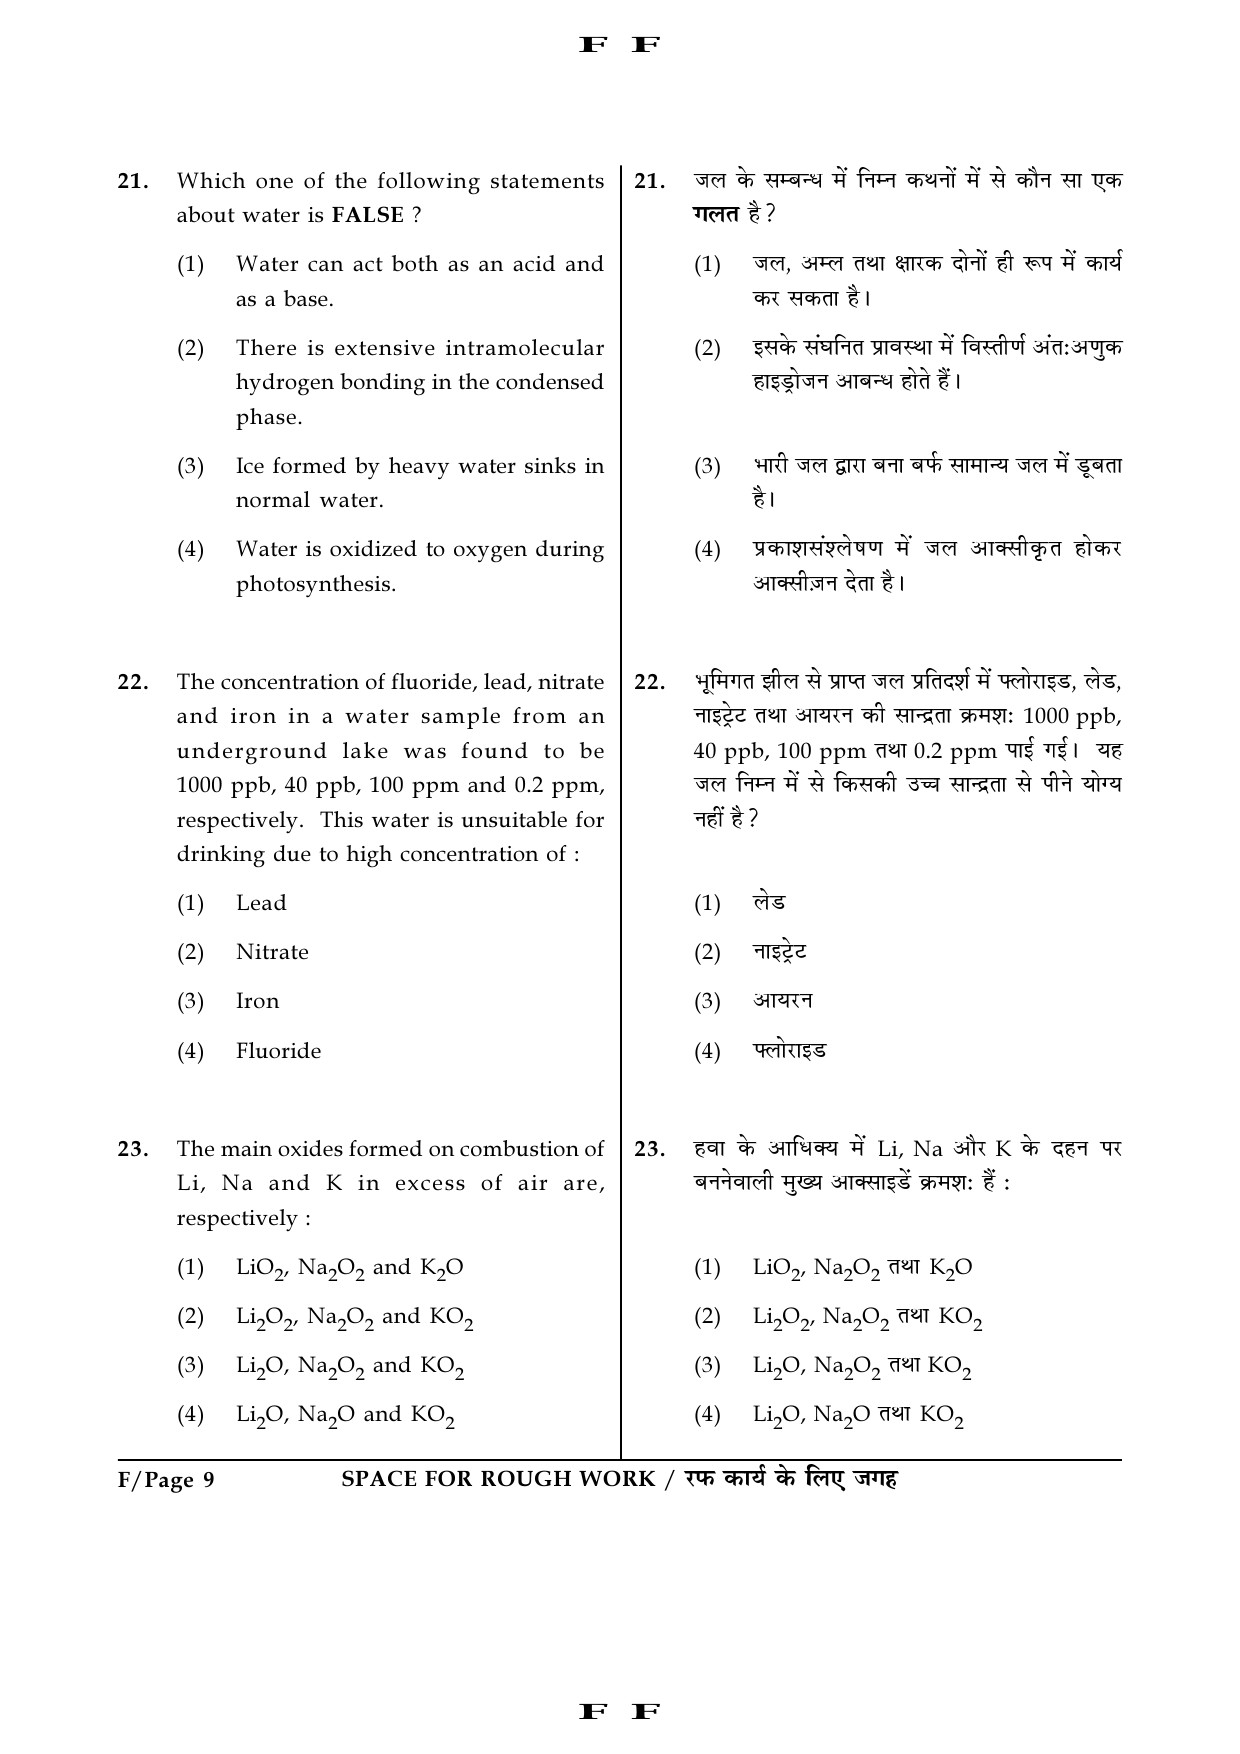 JEE Main Exam Question Paper 2016 Booklet F 9